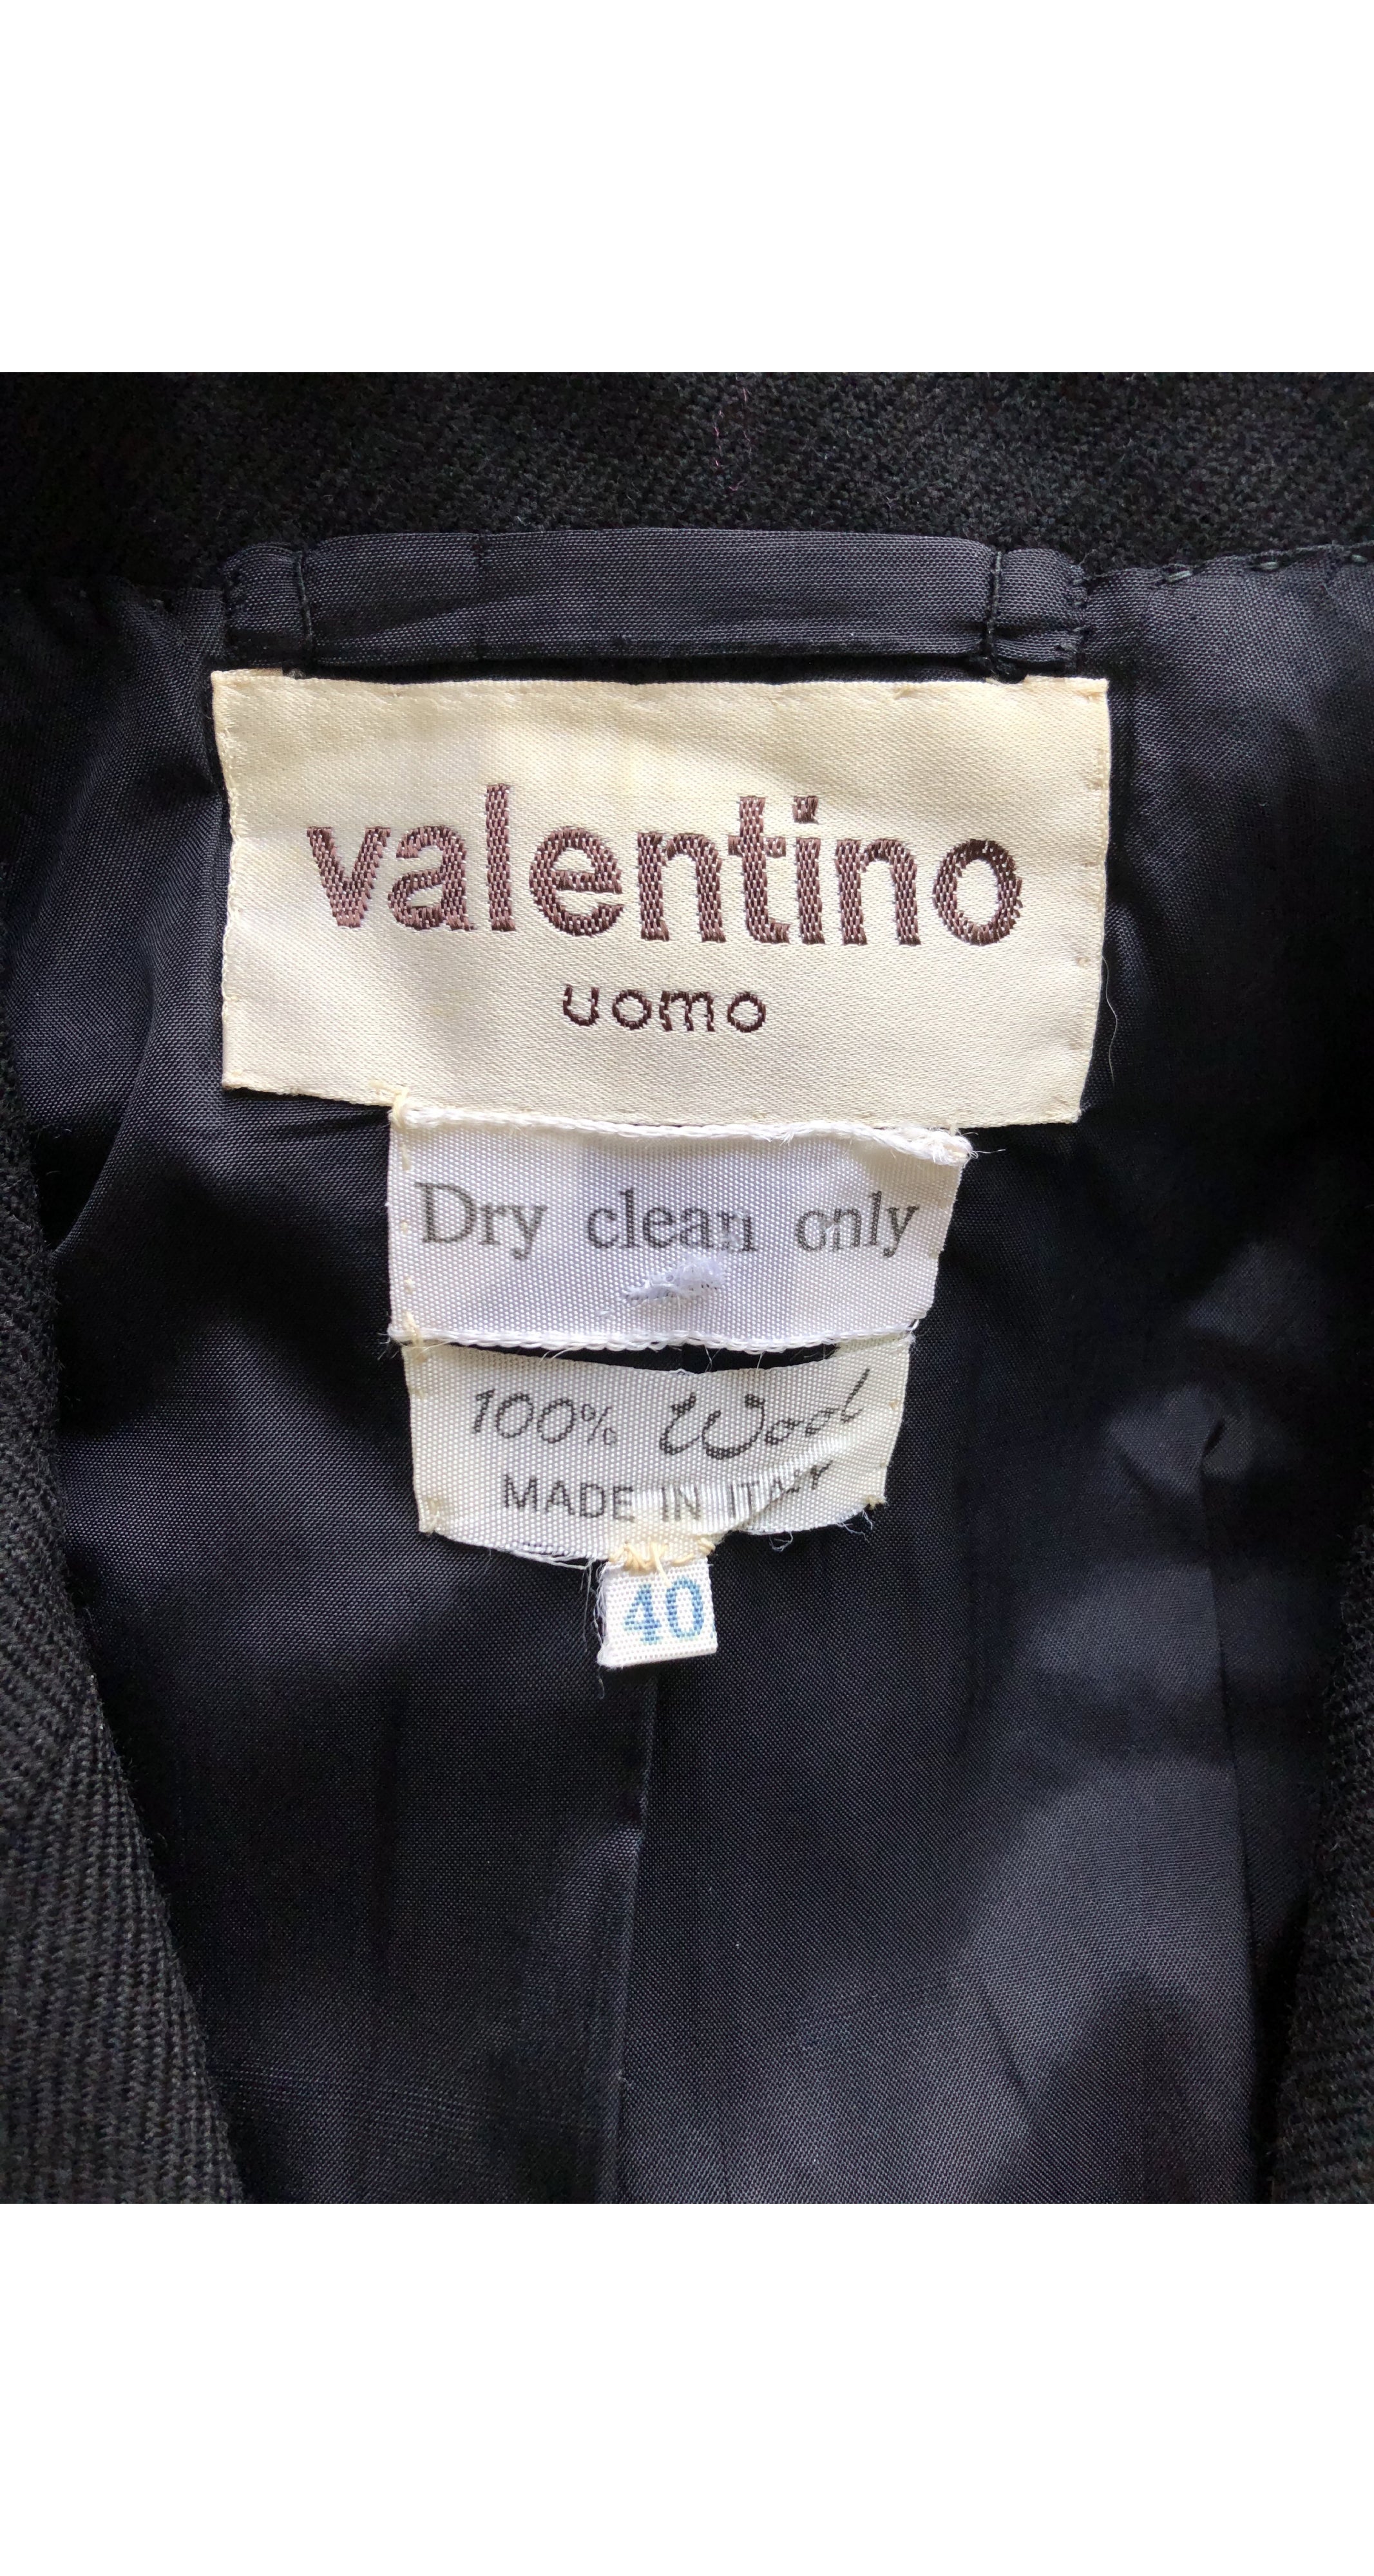 Valentino Uomo 1970s Men's Black Wool Double-Breasted Suit Jacket ...